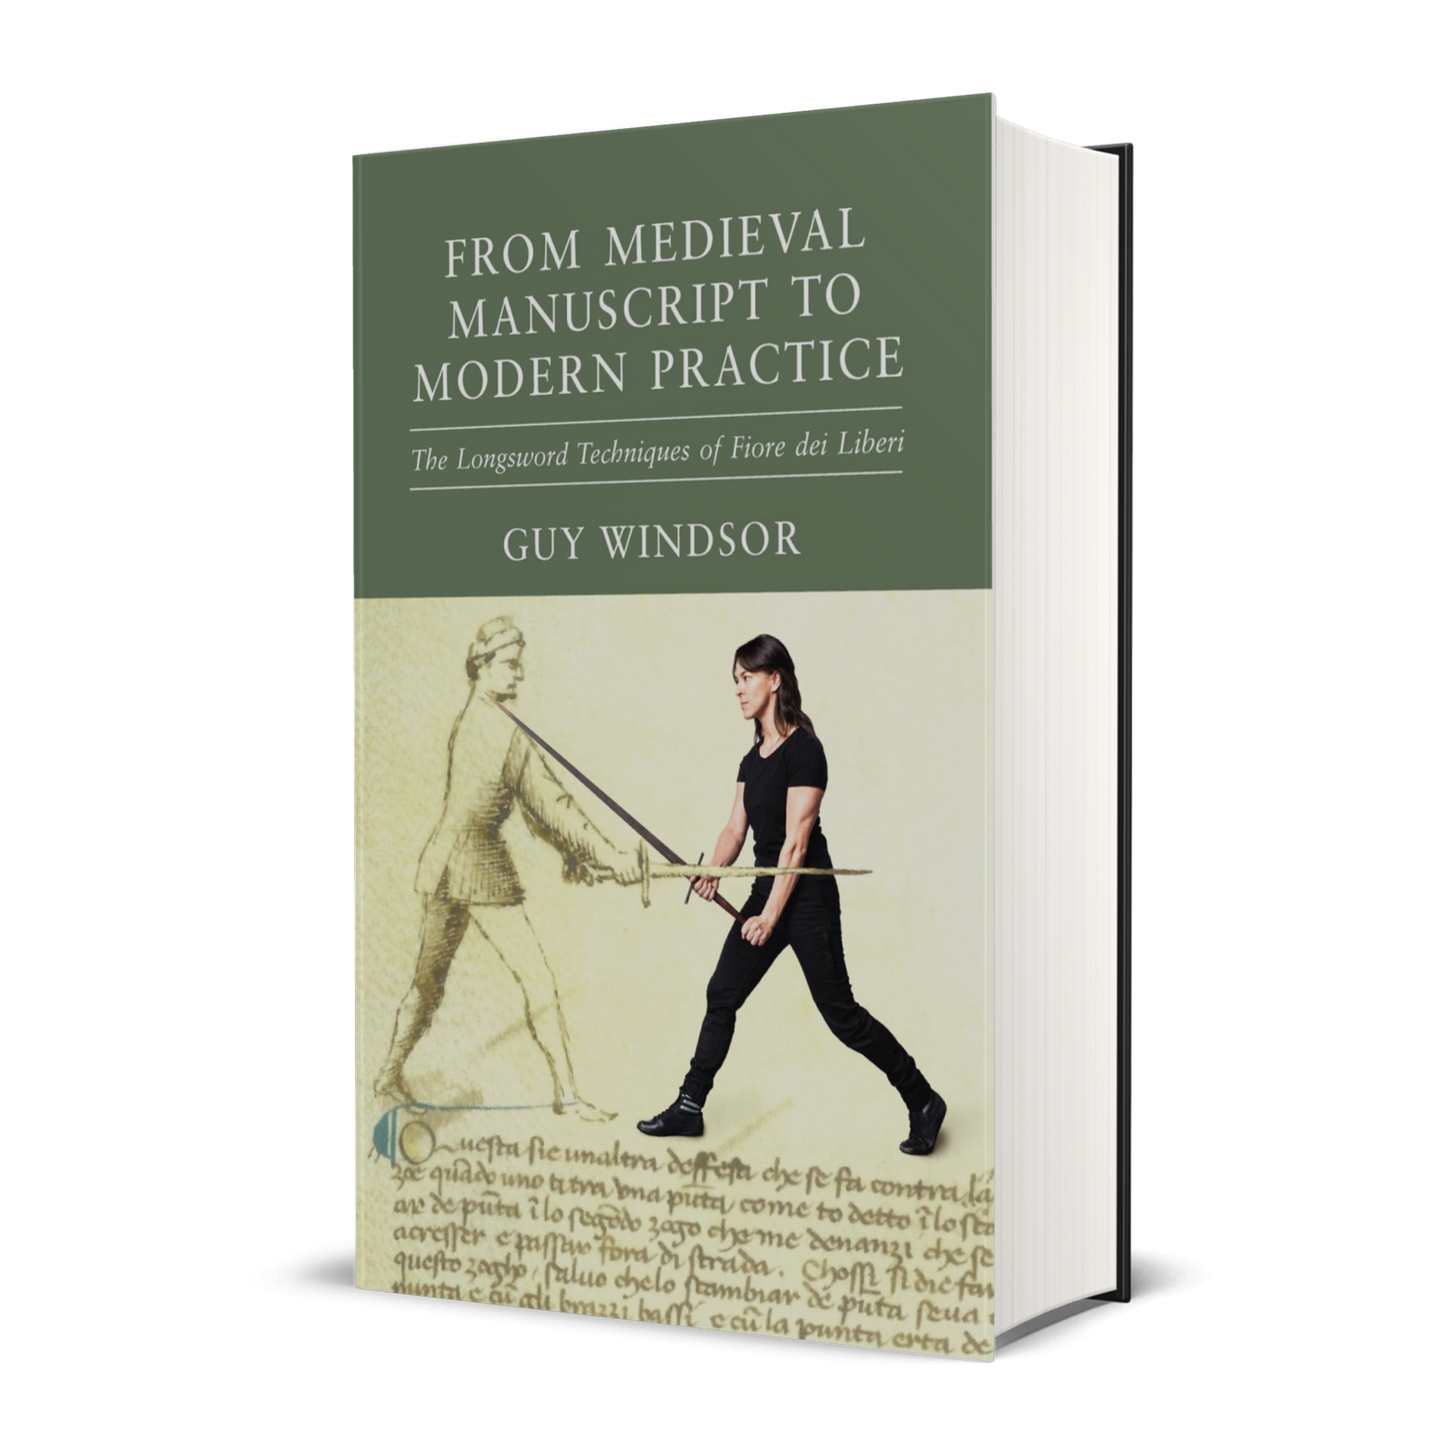 From Medieval Manuscript to Modern Practice: The Longsword Techniques of Fiore dei Liberi (hardback)